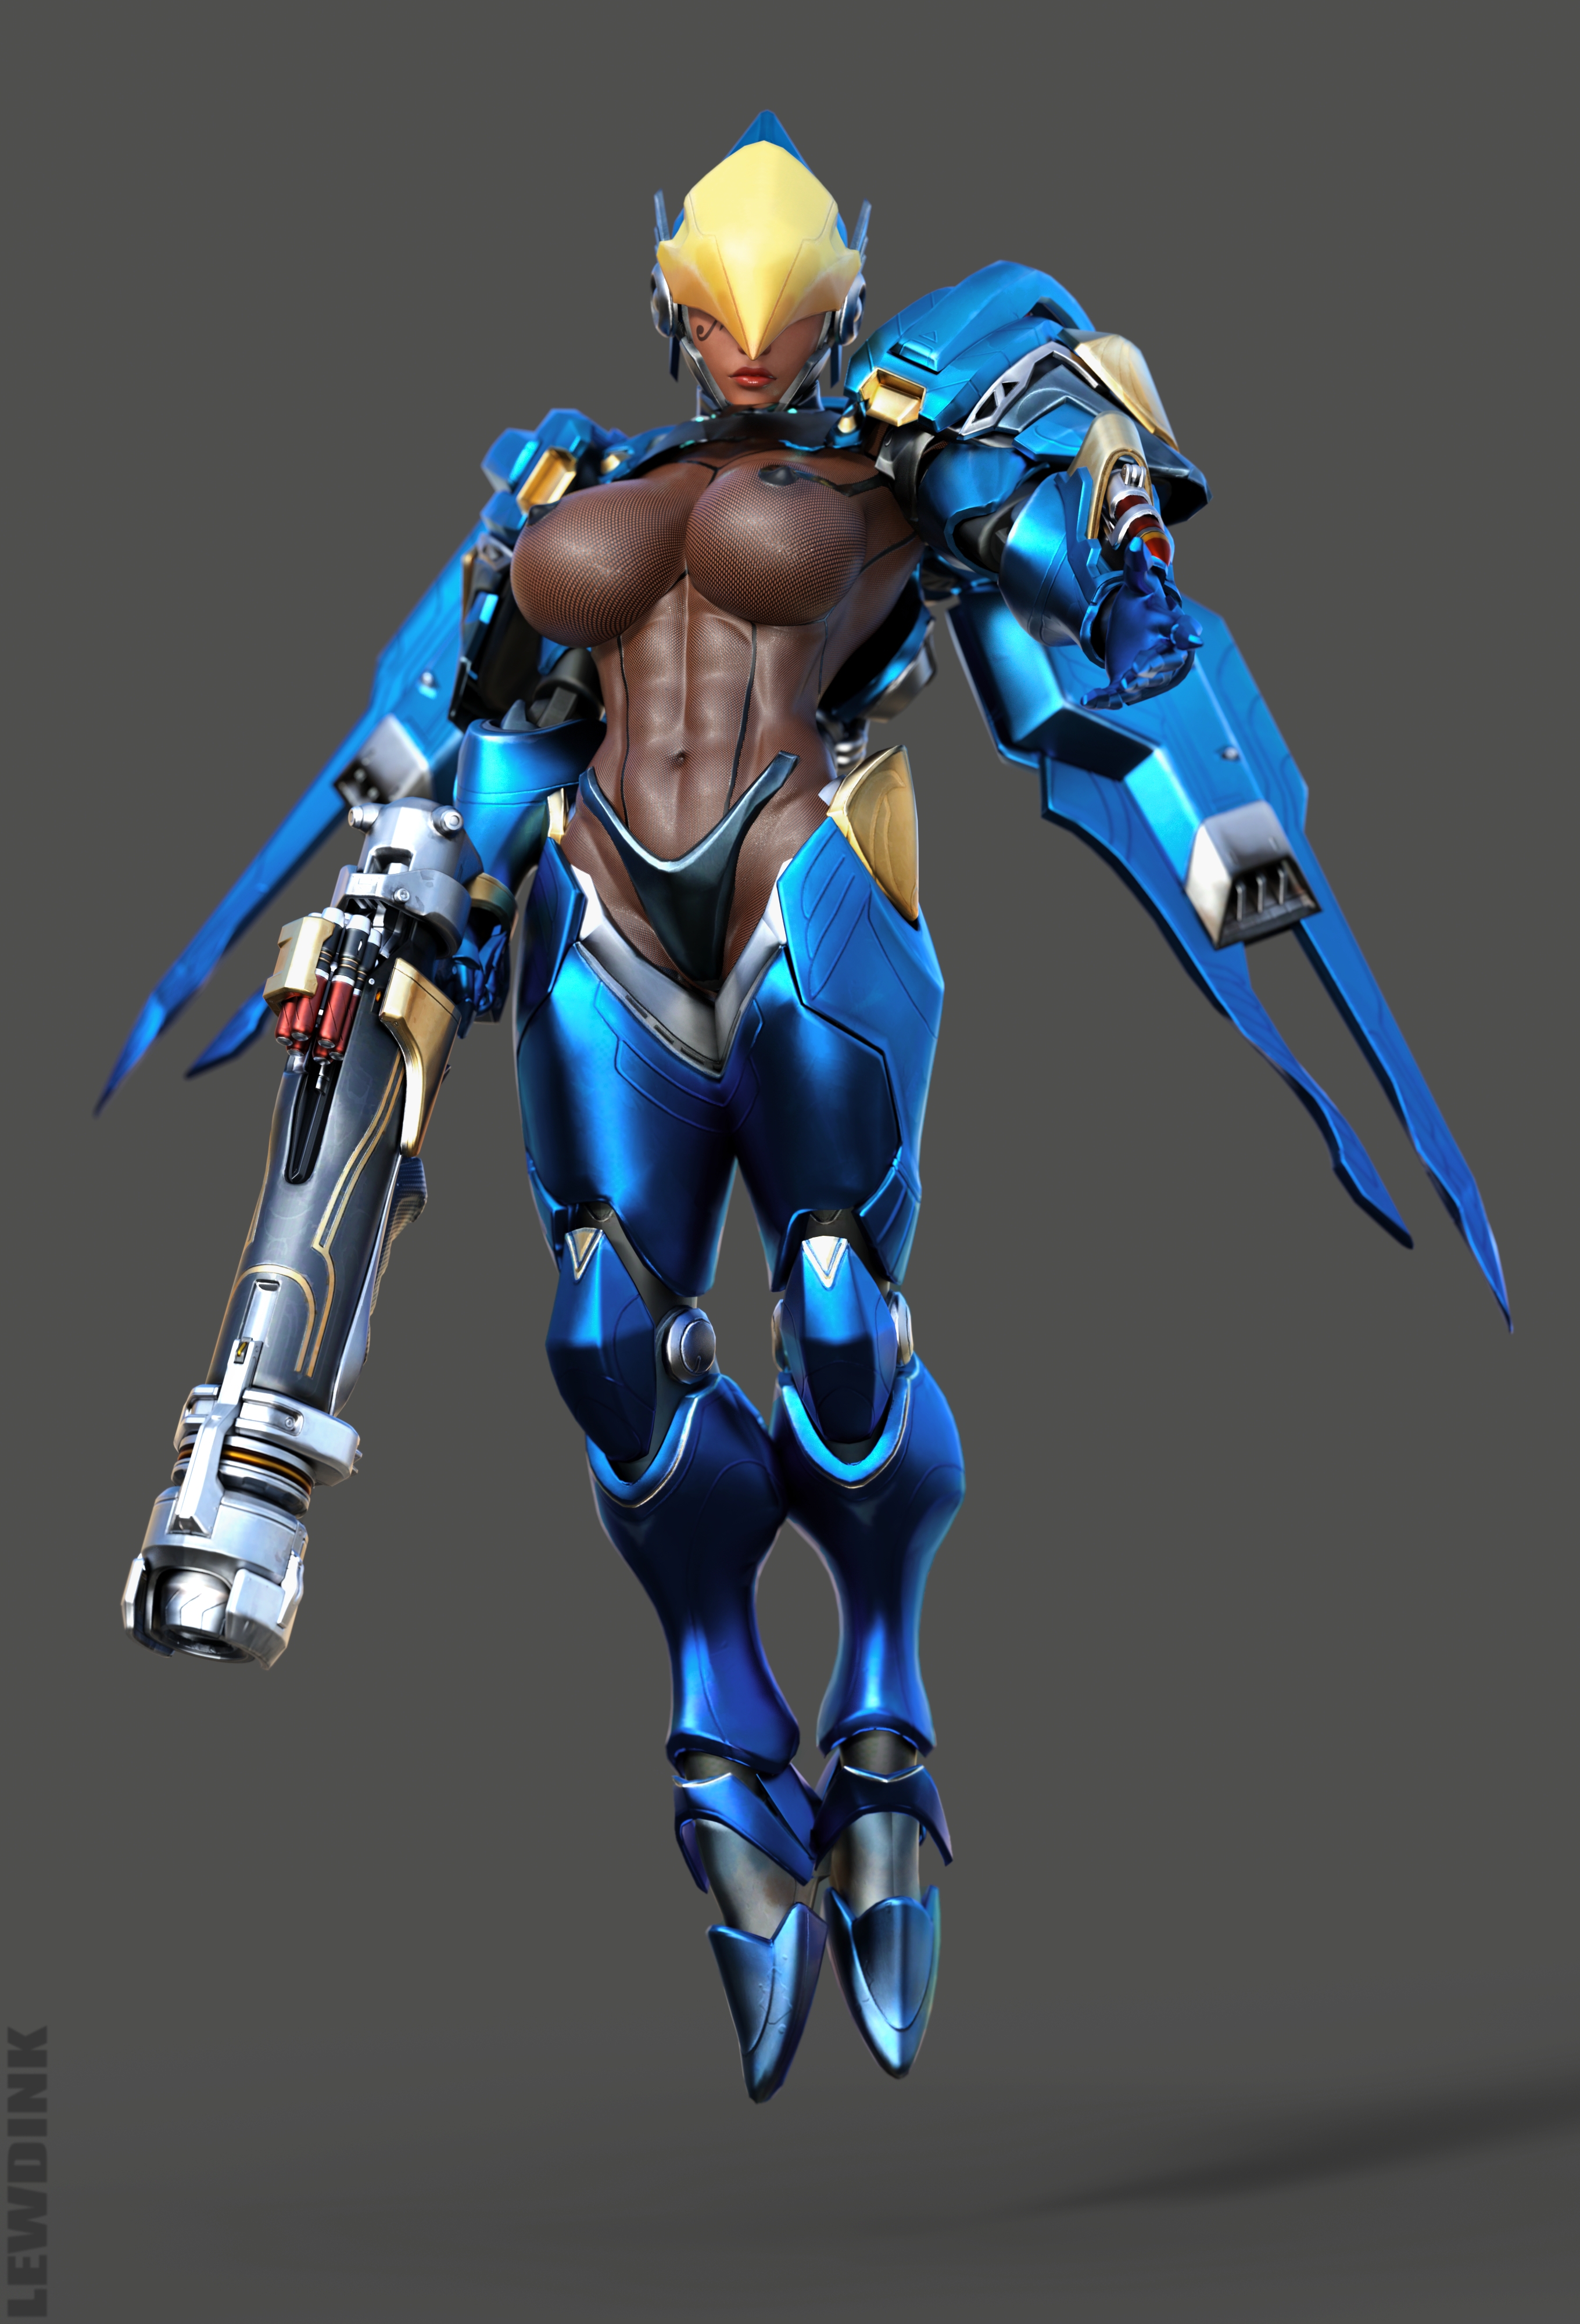 Pharah - Armored Bimbo OW3 Pharah Pharah (overwatch) Overwatch Muscular Girl 3d Porn 3d Girl 3dnsfw 3dxgirls Abs Sexy Hot Bimbo Huge Boobs Huge Tits Muscles Musclegirl Pinup Perfect Body Fuck Hard Sexyhot Sexy Ass Sexy Woman Fake Tits Lips Latex Flexible Smirking Big Tits Huge Ass Big Booty Booty Fit Fitness Thicc Mom Milf Mature Mature Woman Spread Legs Spread Thick Thighs Horny Face Short Hair Hardcore Curvy Big Ass Big boobs Big Breasts Big Butt Brown Eyes Cleavage Fishnet Stockings Fishnet Nipple Piercing Piercing Belly Button Piercing Leather Jacket Thighs Jewels Pawg Ass Red head Tribal Weapon Armor Nude Boobs Pregnant Big Balls Big Nipples Lingerie Sexy Lingerie Womb Tattoo Face Tattoo Slut Whore Bitch Comic Hotpants Shorts Long Hair Smile Blonde Graffiti Splash Body Paint Paint Squatting Japanese Korean Asian Priestess Nun Chrome Body Writings Slave Submissive Domination Cum Facial Cumshot Cum Inside Cum Covered Cum In Mouth Tongue Out Tongue Long Tongue Grabbing Arms Grab Grab Boobs Prostitute Hooker Toilet Futanari Futa Musclewoman Thai Fanart High Heels Platform Heels